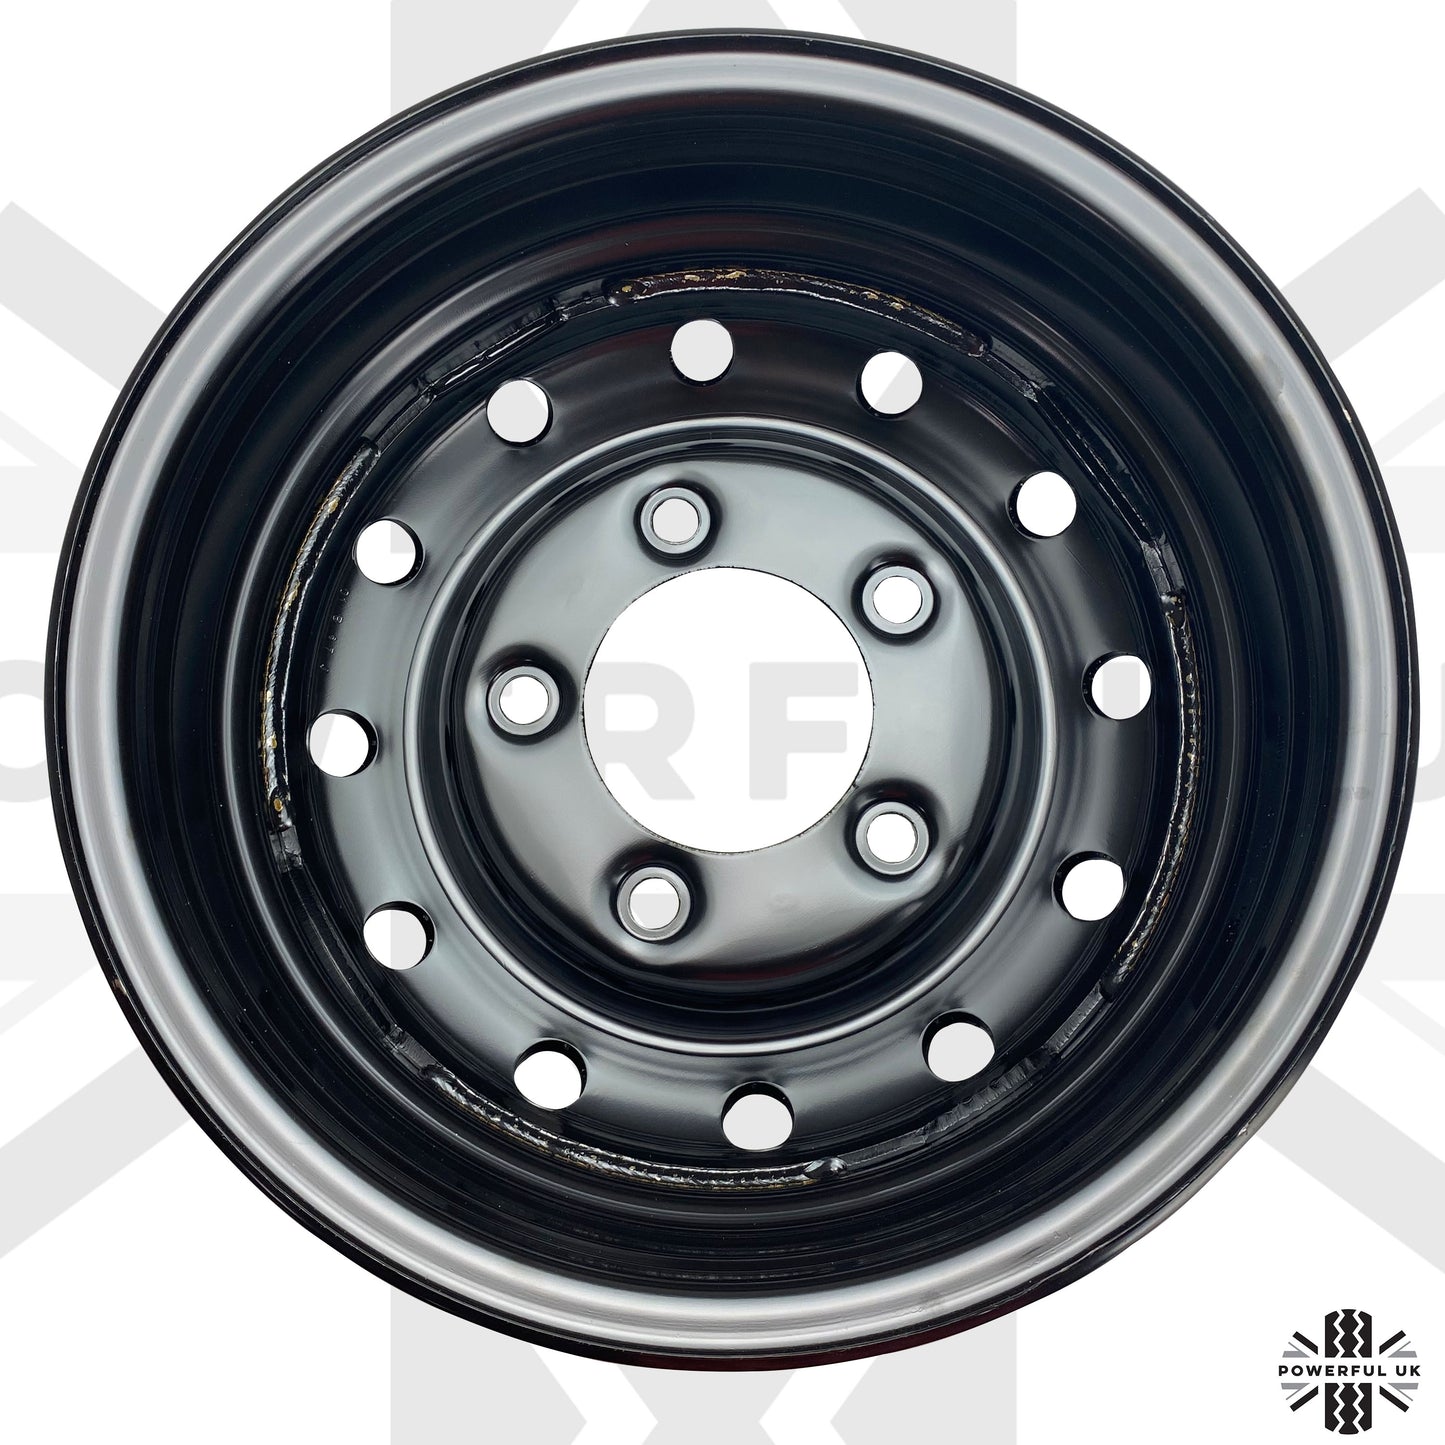 16" Heavy Duty Steel Wheels - Primer - Set of 4 for Classic Land Rover Defender